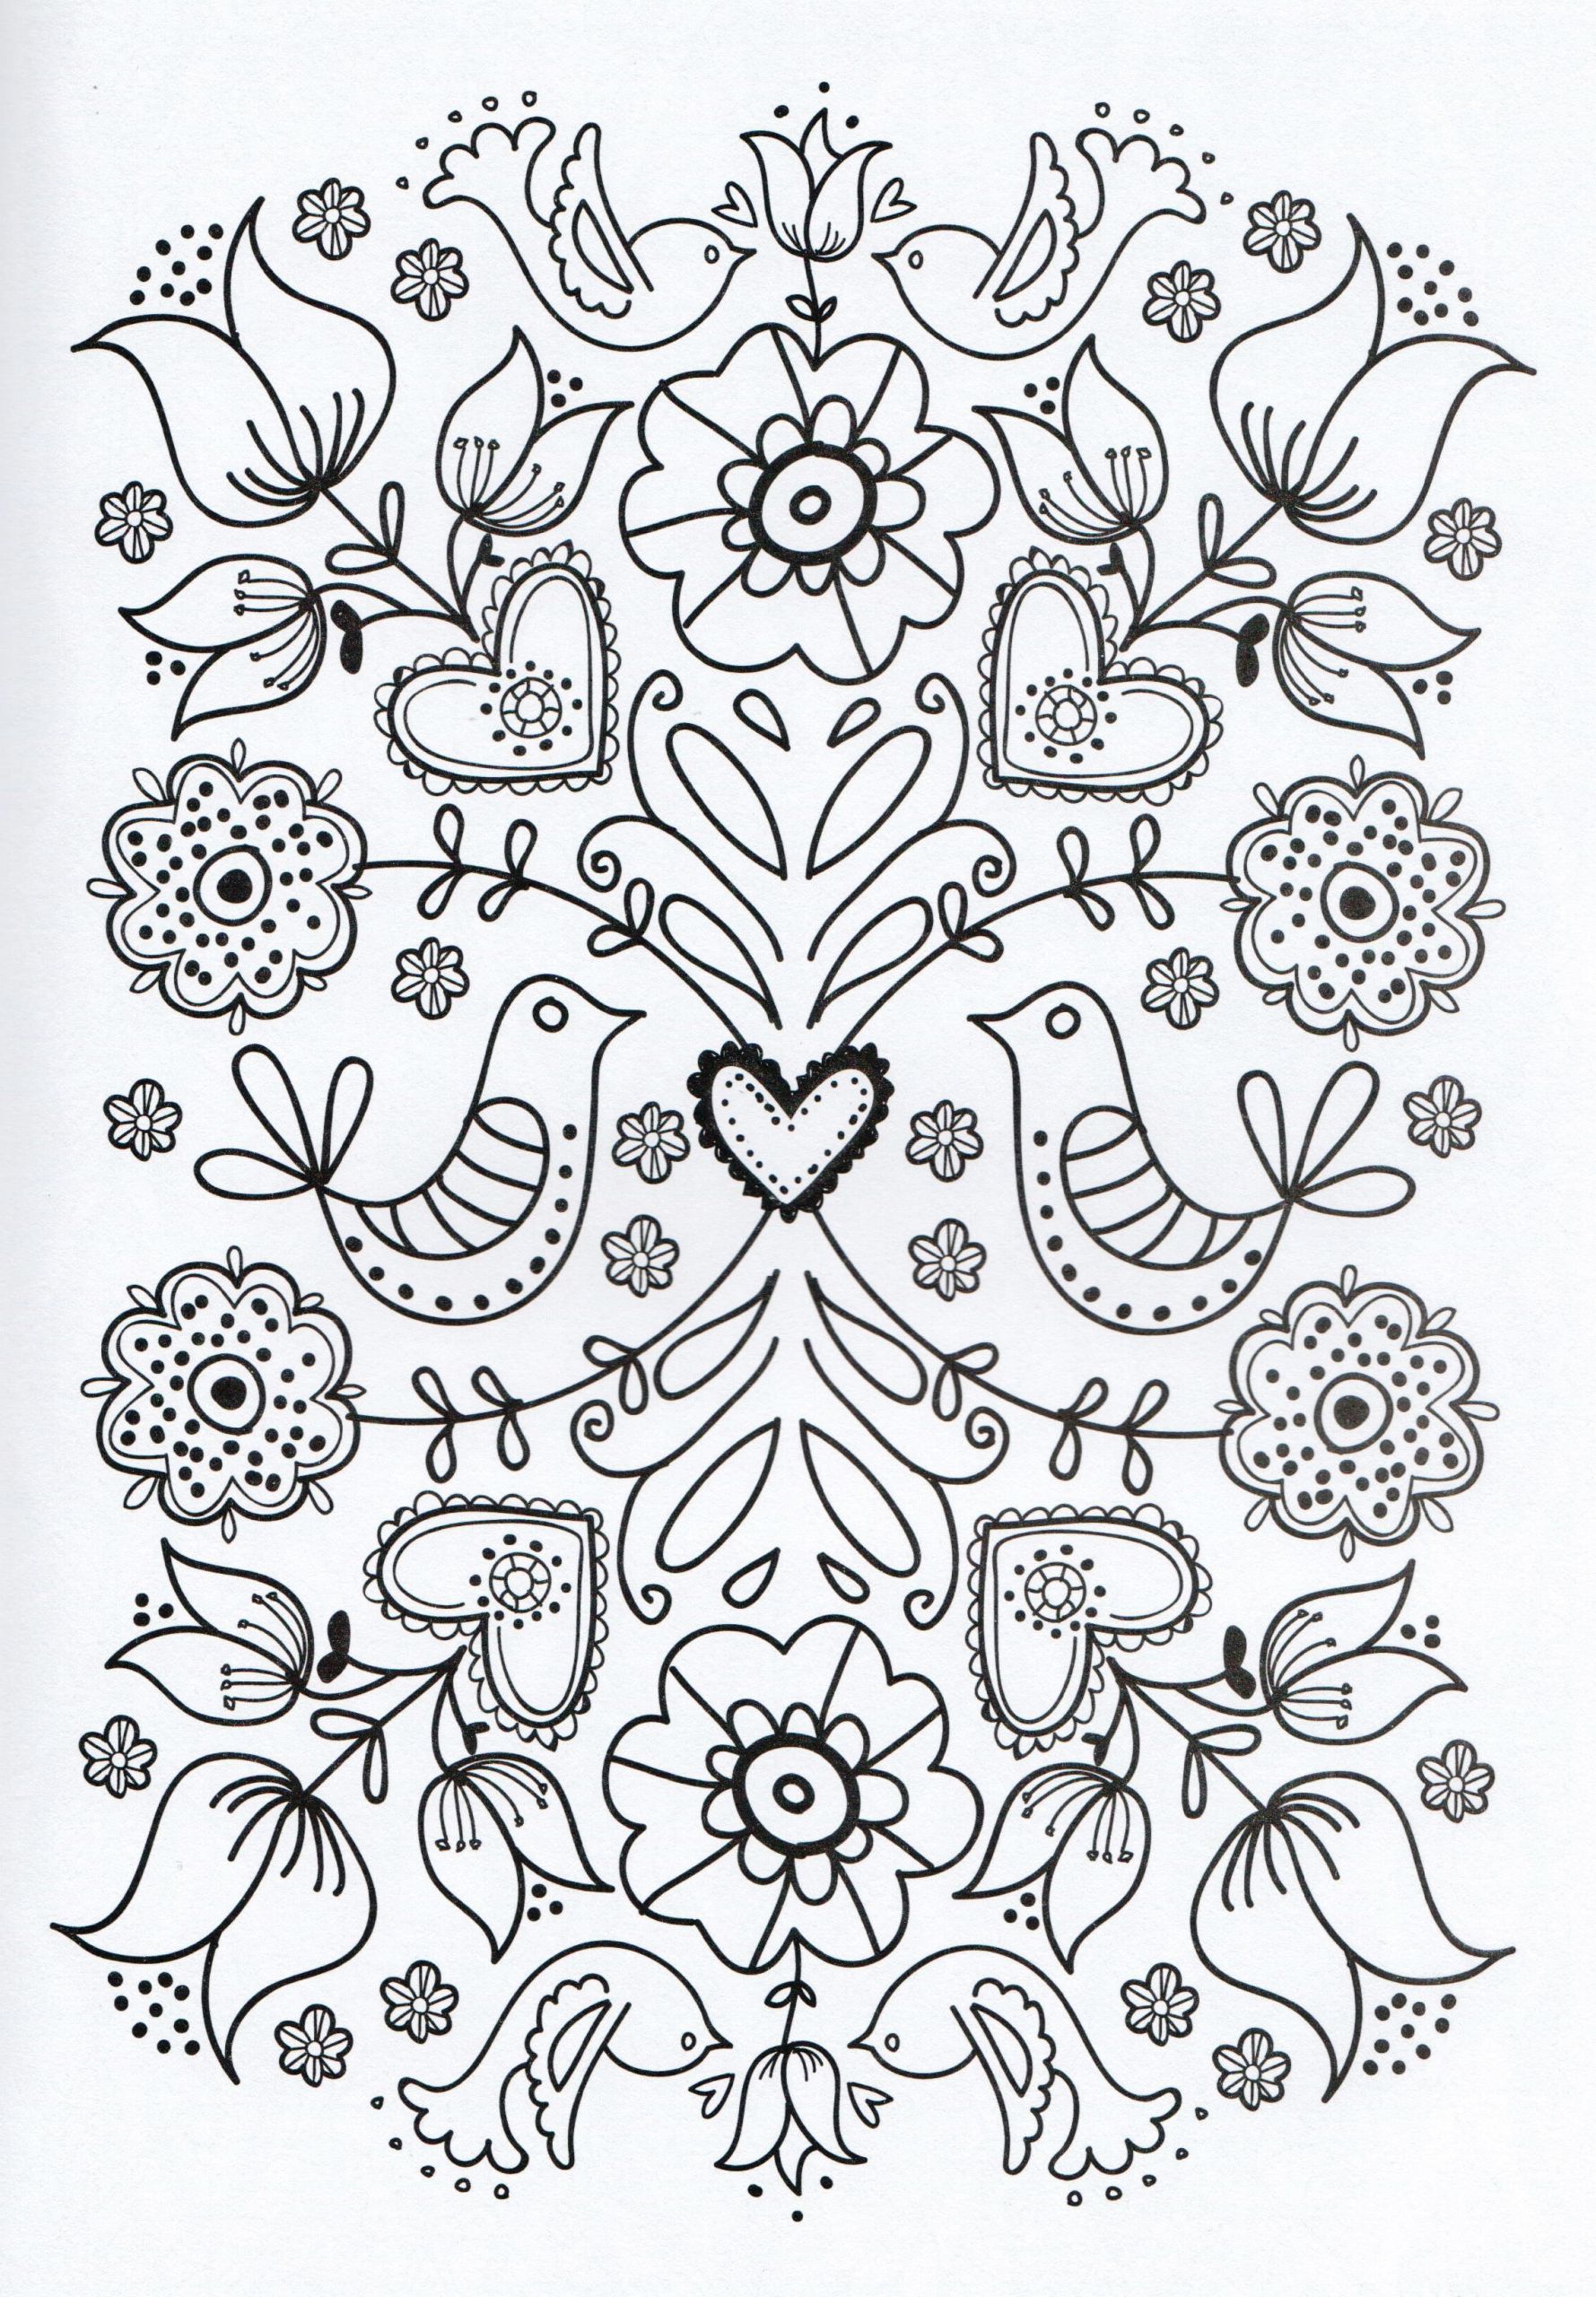 DIY Adult Coloring Book
 10 Simple & Useful Mother’s Day Gifts to DIY or Buy